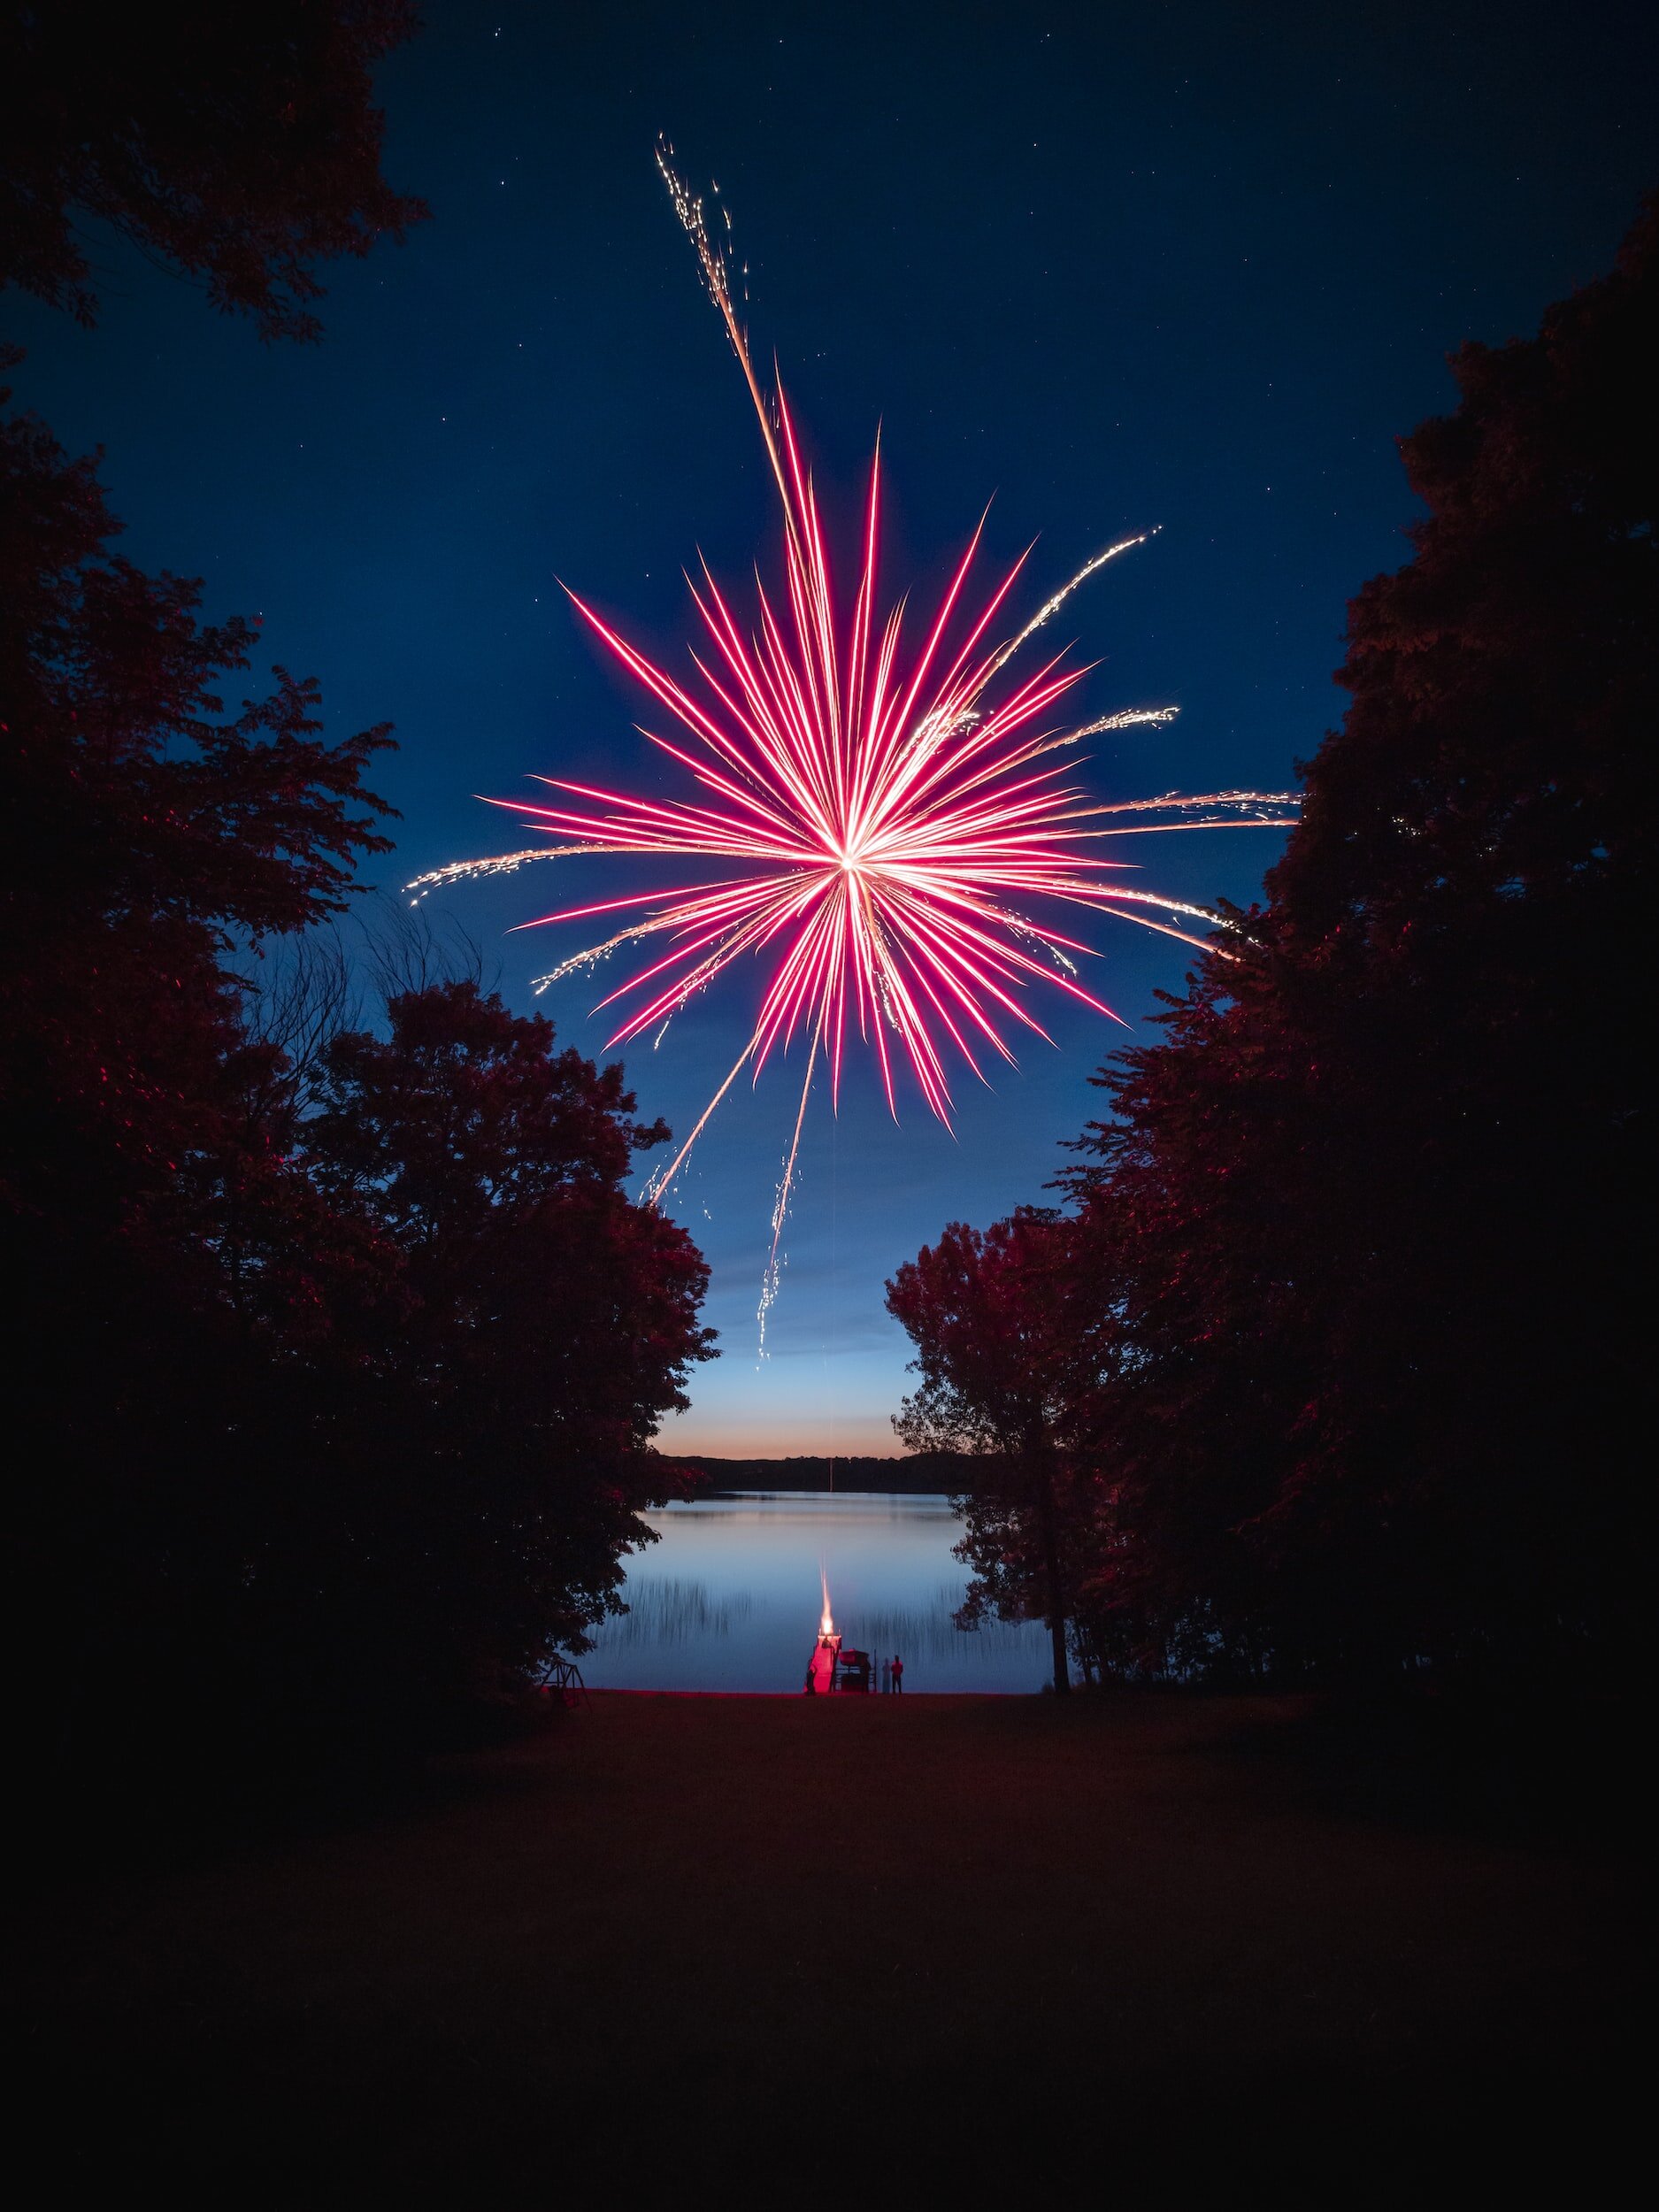 Best Places to Camp for the Fourth of July to View Fireworks in